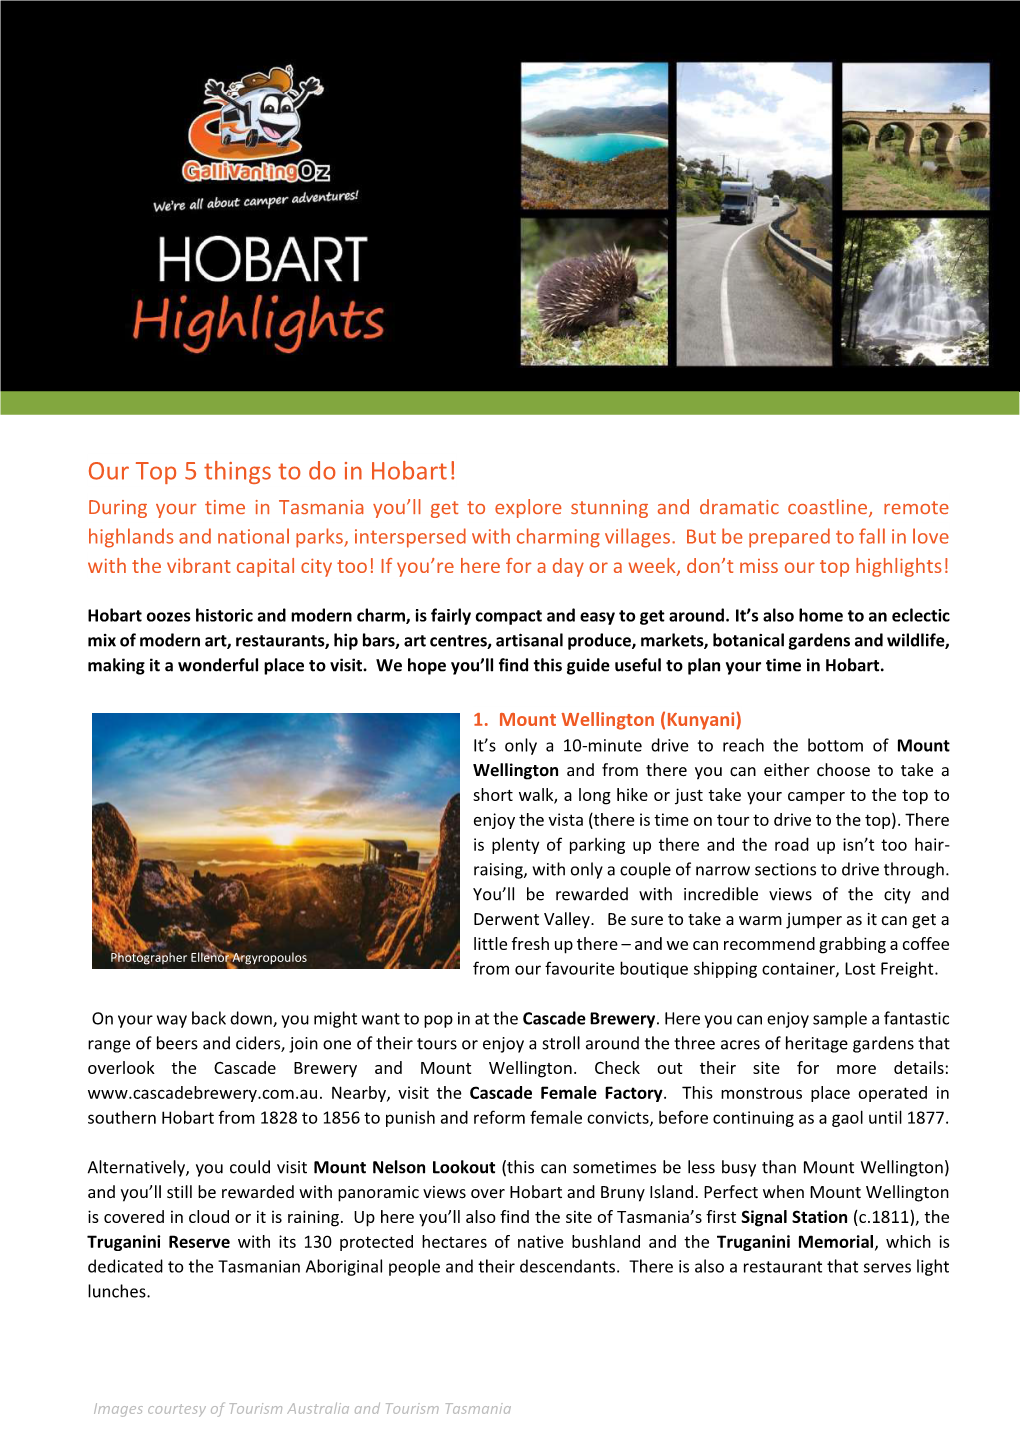 Our Top 5 Things to Do in Hobart!